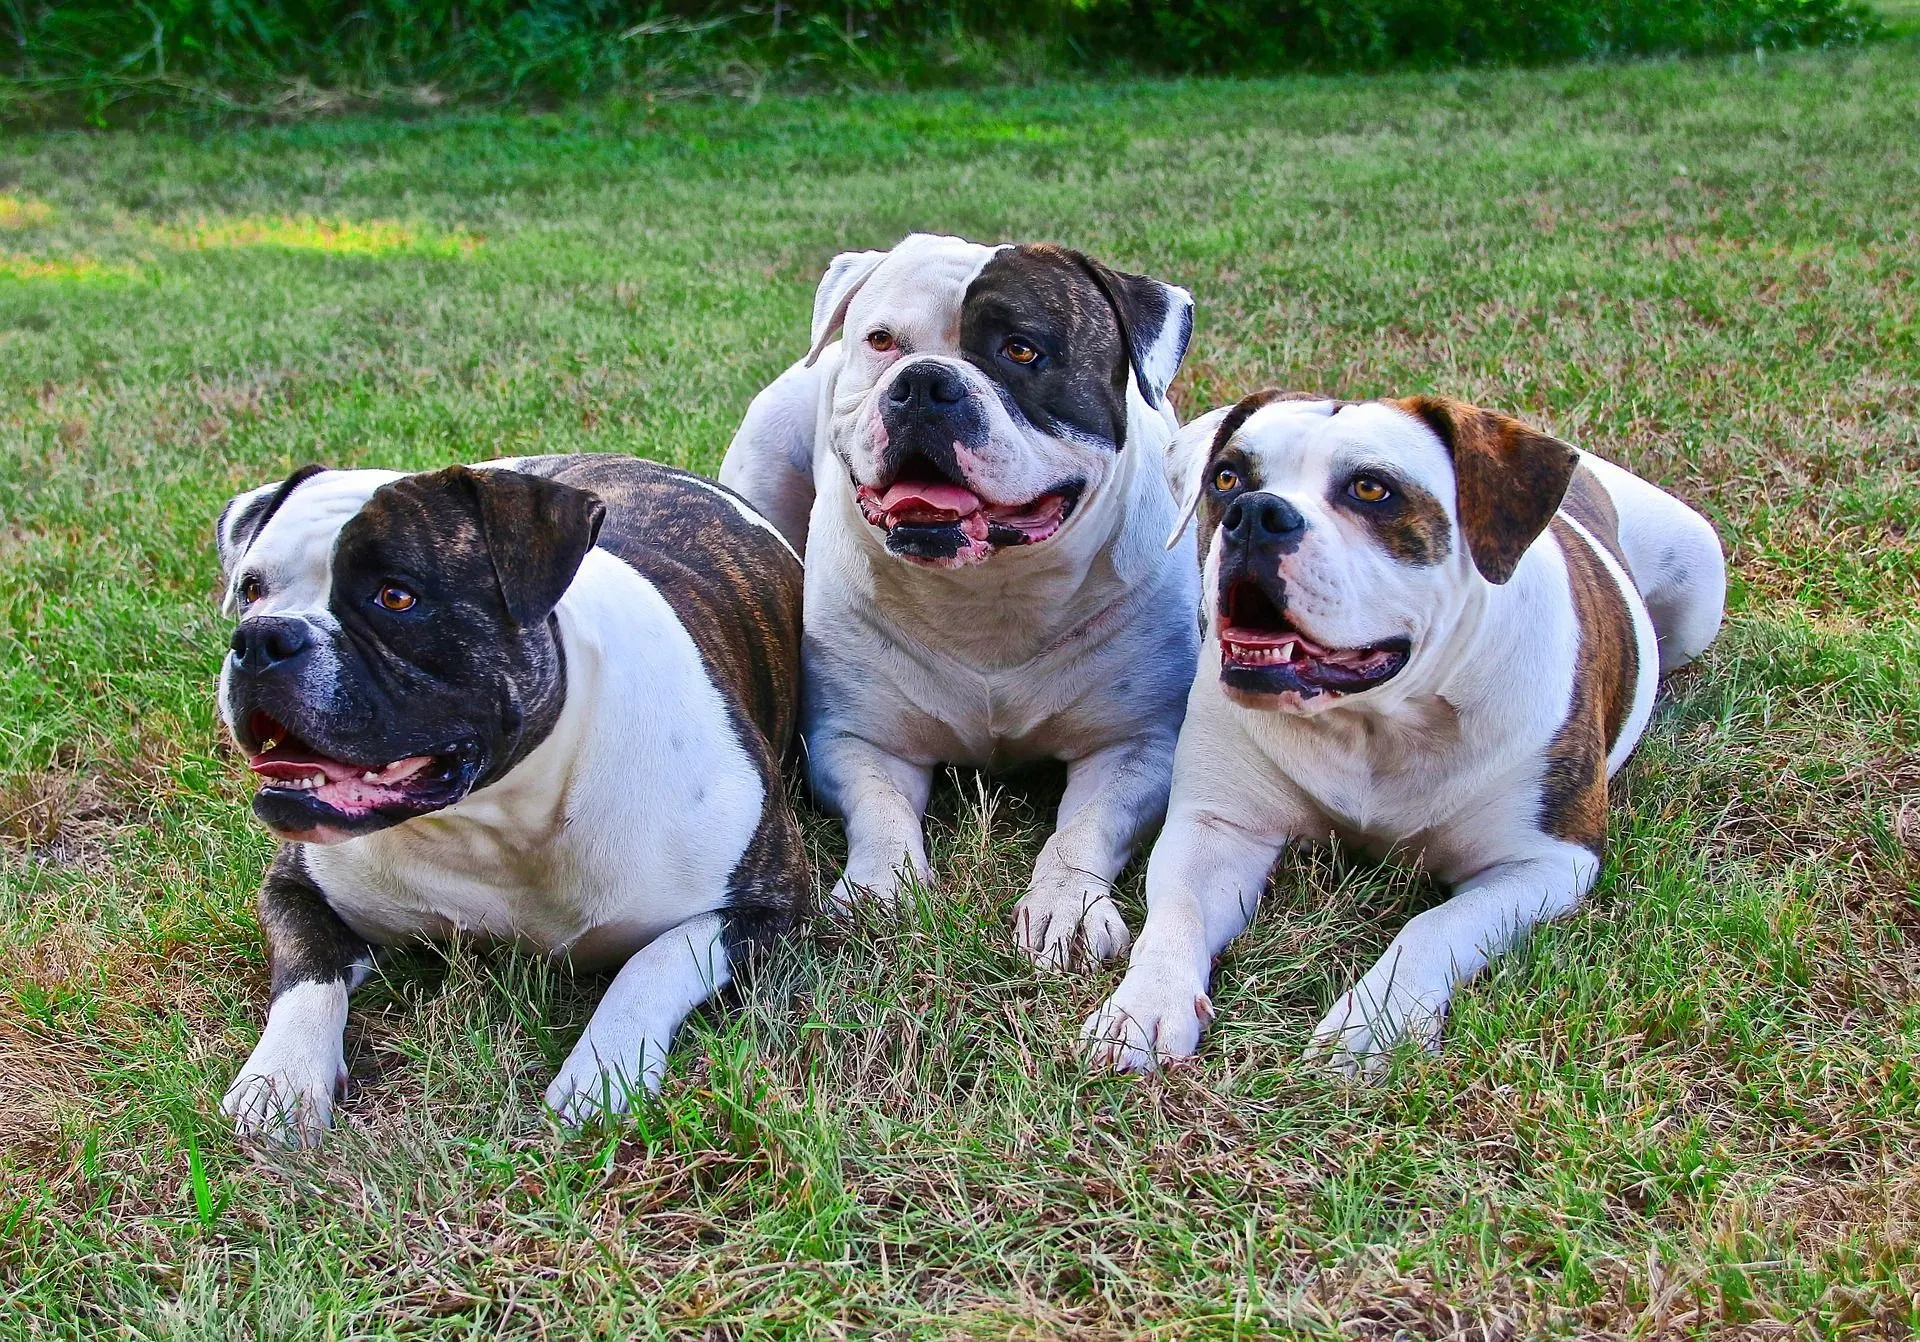 American Bulldog is often confused with the breed Dogo Argentino.